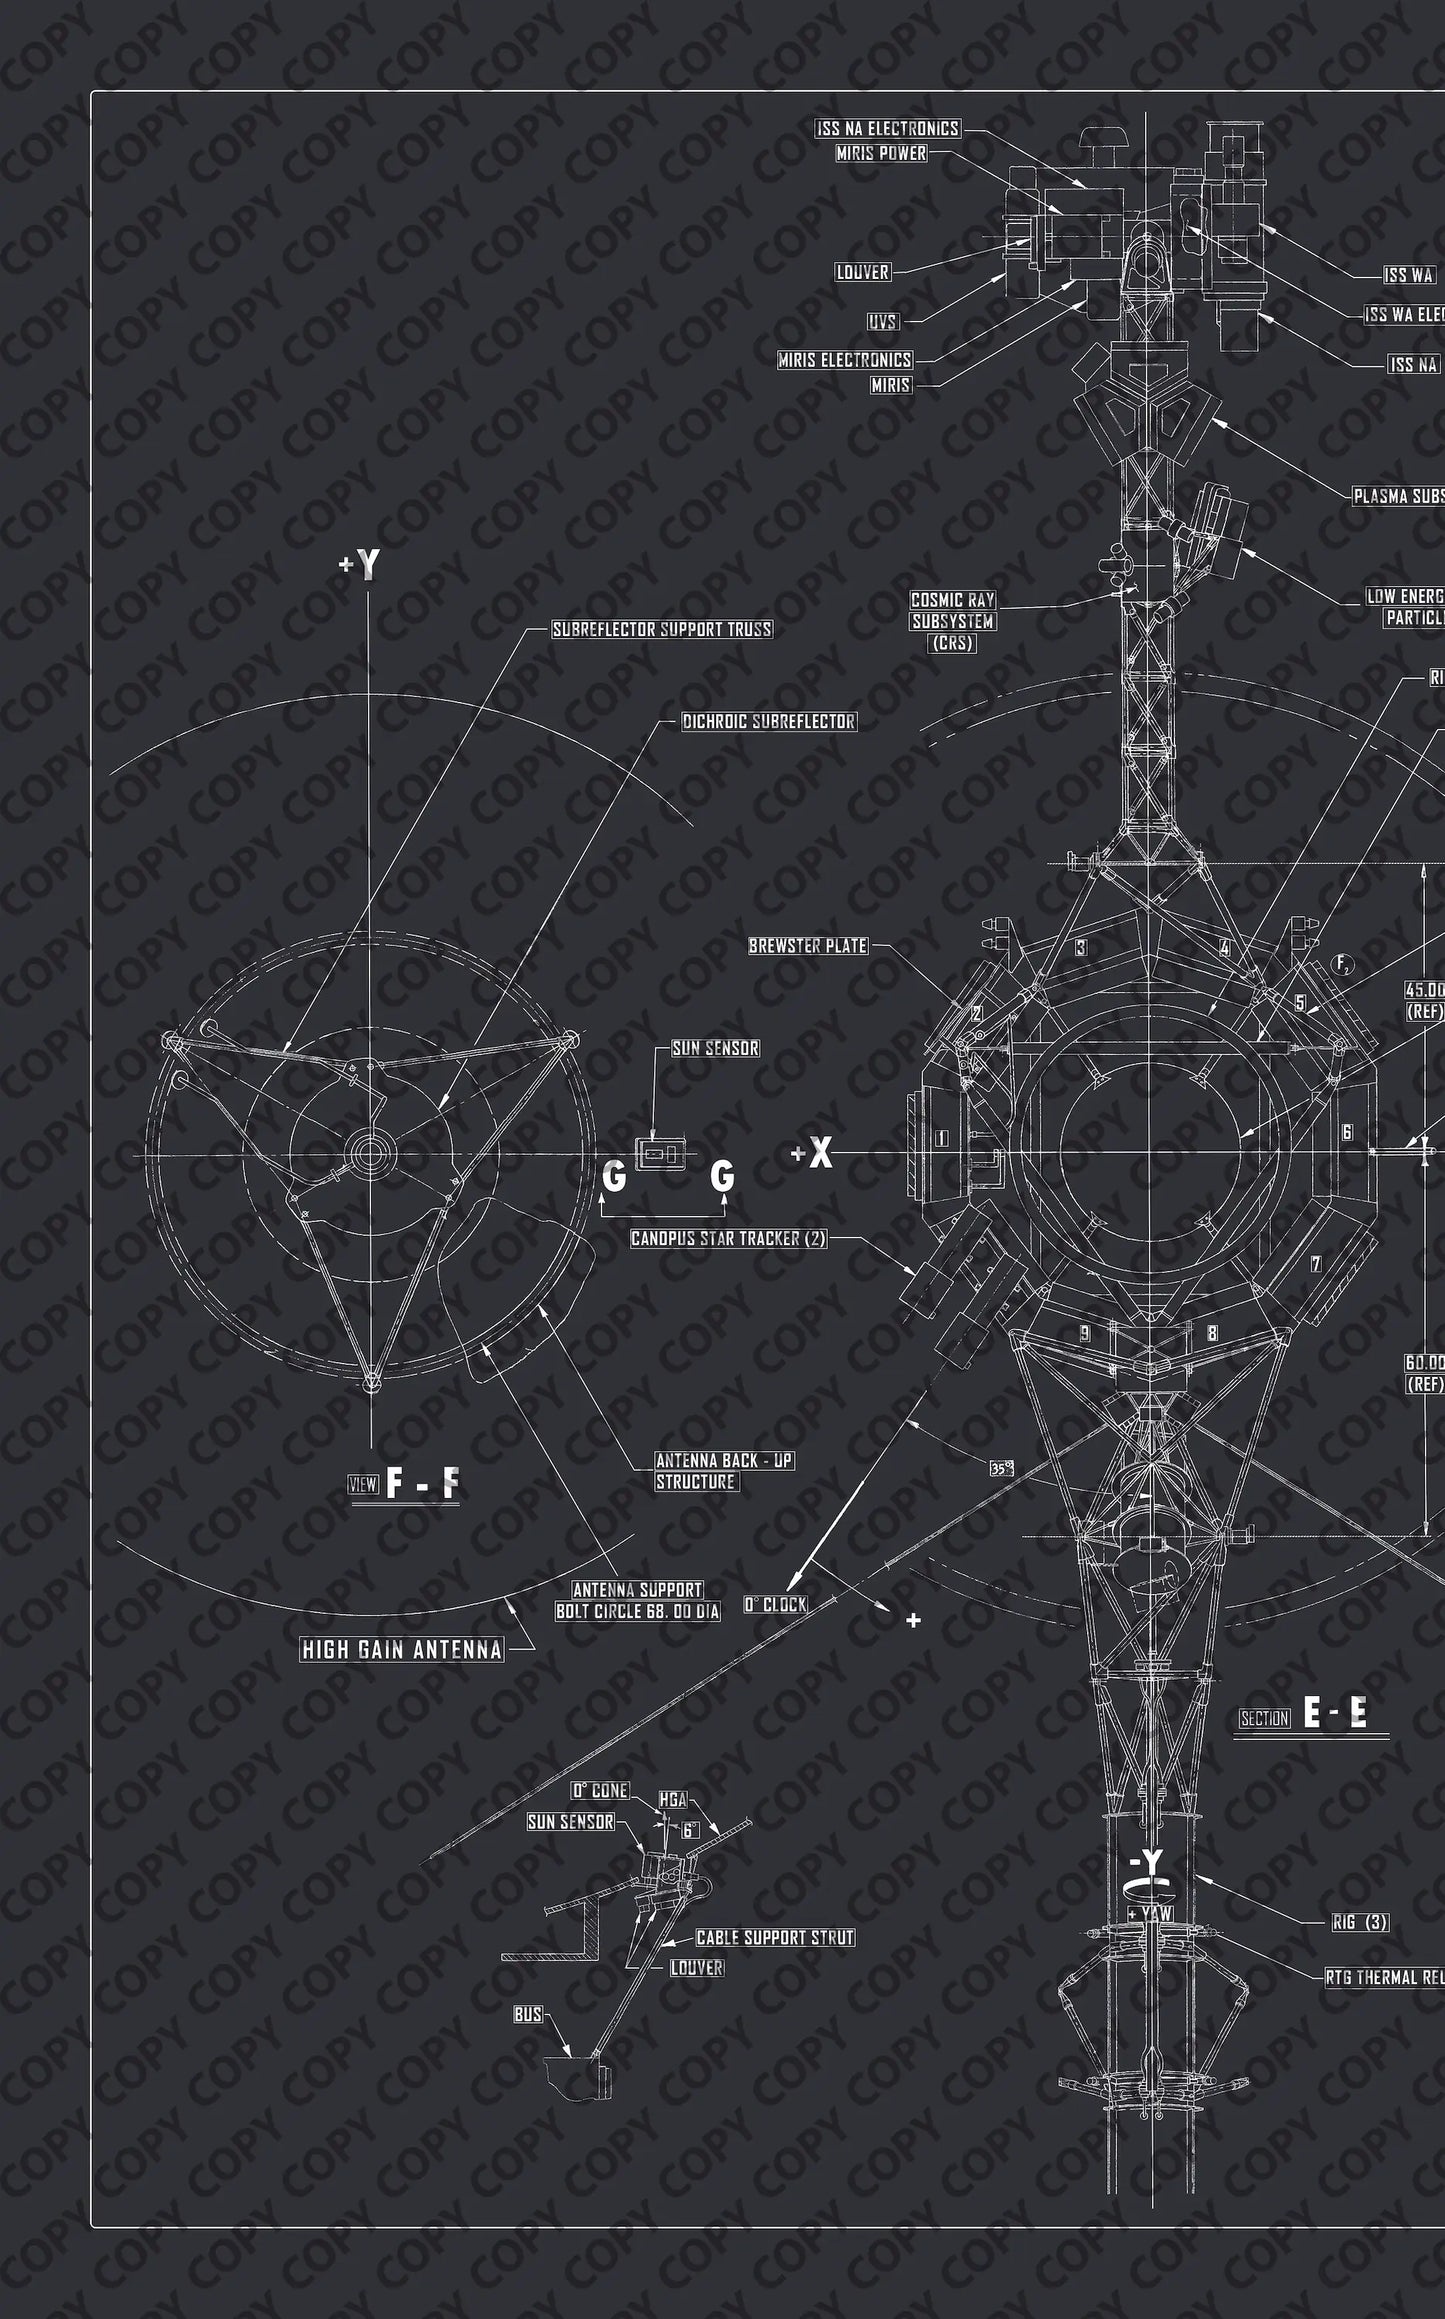 Voyager Space Probes Blueprint | Rocket Blueprint Posters | NASA | JPL | A segment of the Voyager Probes blueprint, set against a dark backdrop, with white technical drawings and detailed annotations. Components like the antenna back-up structure, Brewster plate, and cosmic ray subsystem are clearly labeled, highlighting the complexity of the spacecraft's design.